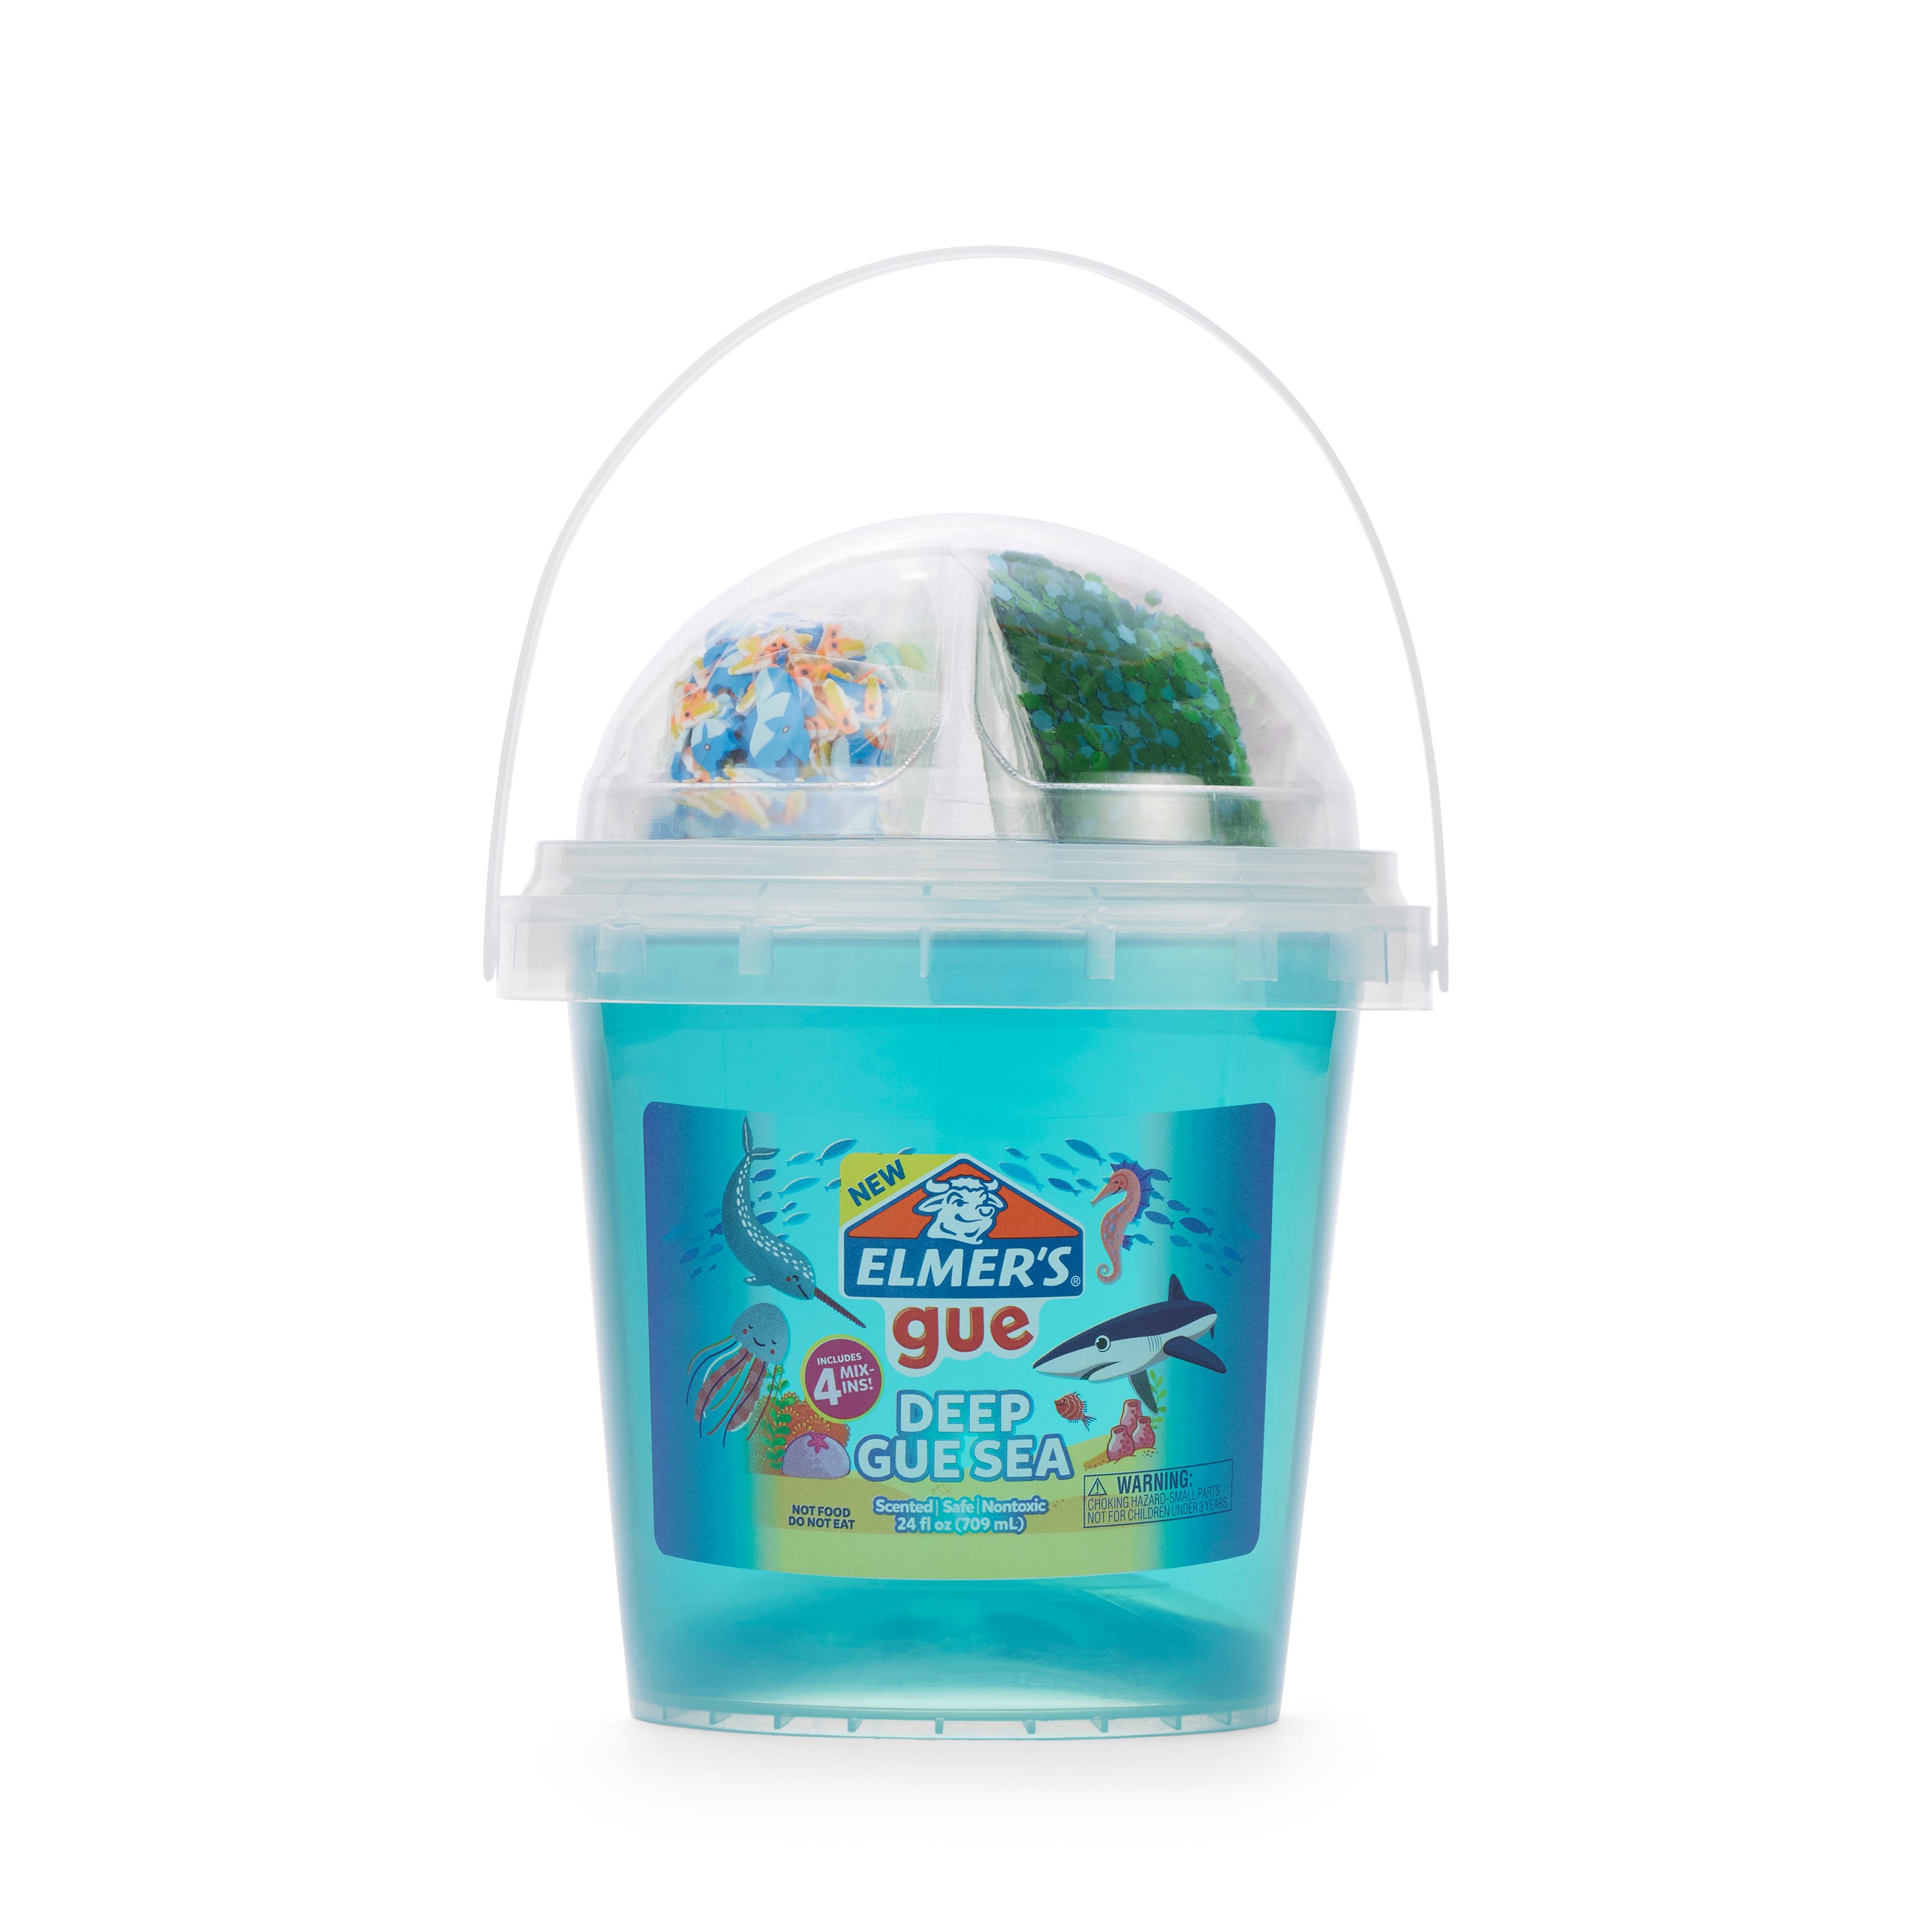 Elmer's Gue Premade Slime, Candy Blast Scented Edition, 8 oz. 